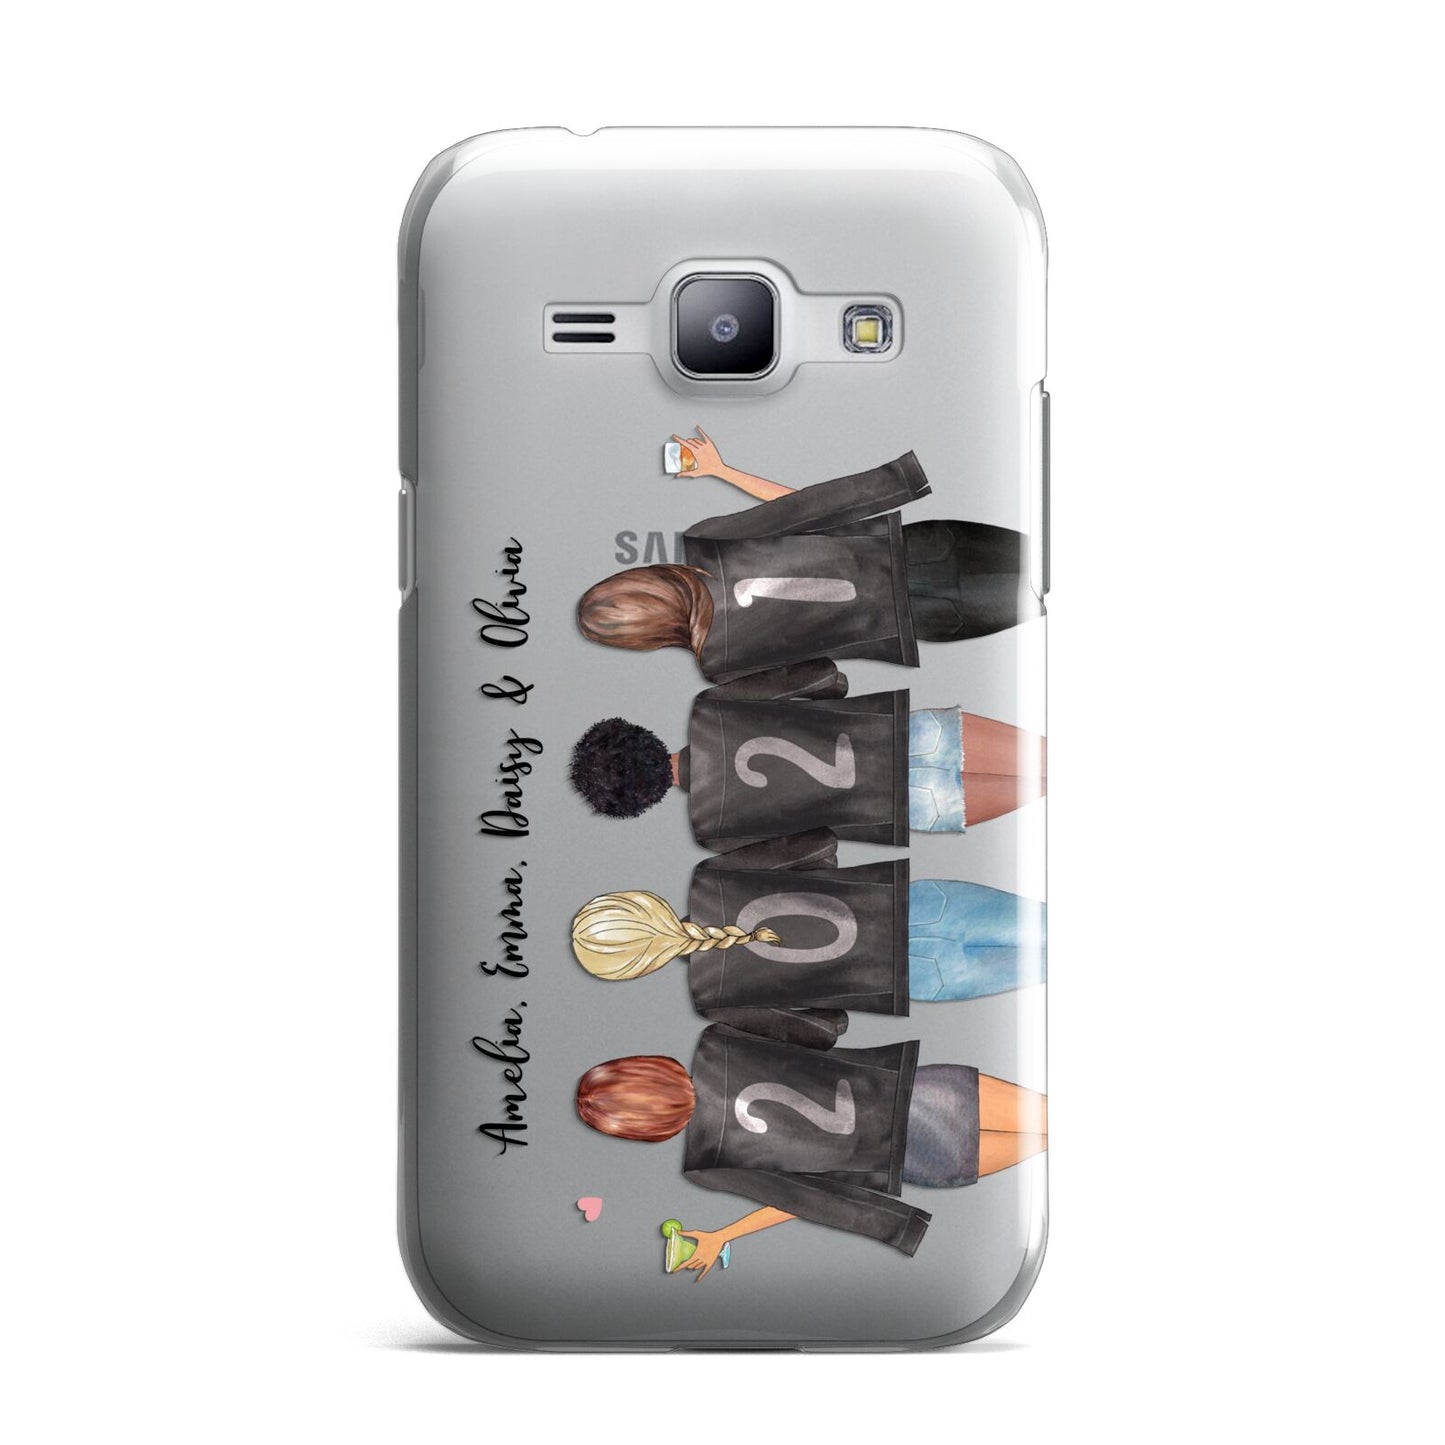 4 Best Friends with Names Samsung Galaxy J1 2015 Case